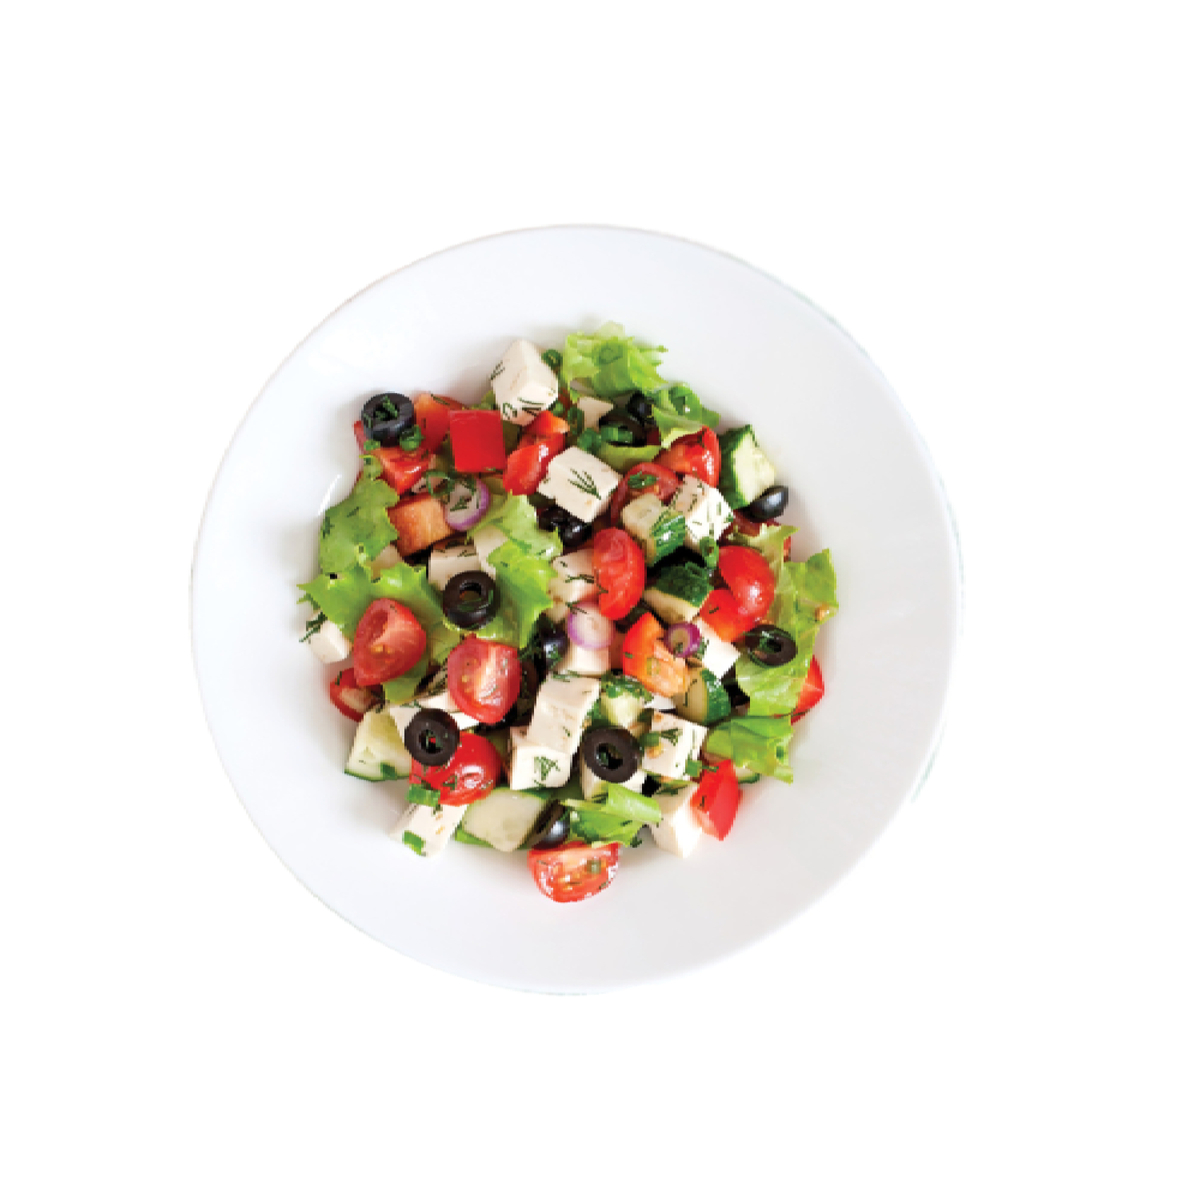 Sliced Olives & Cheese Salad 300g Approx. Weight